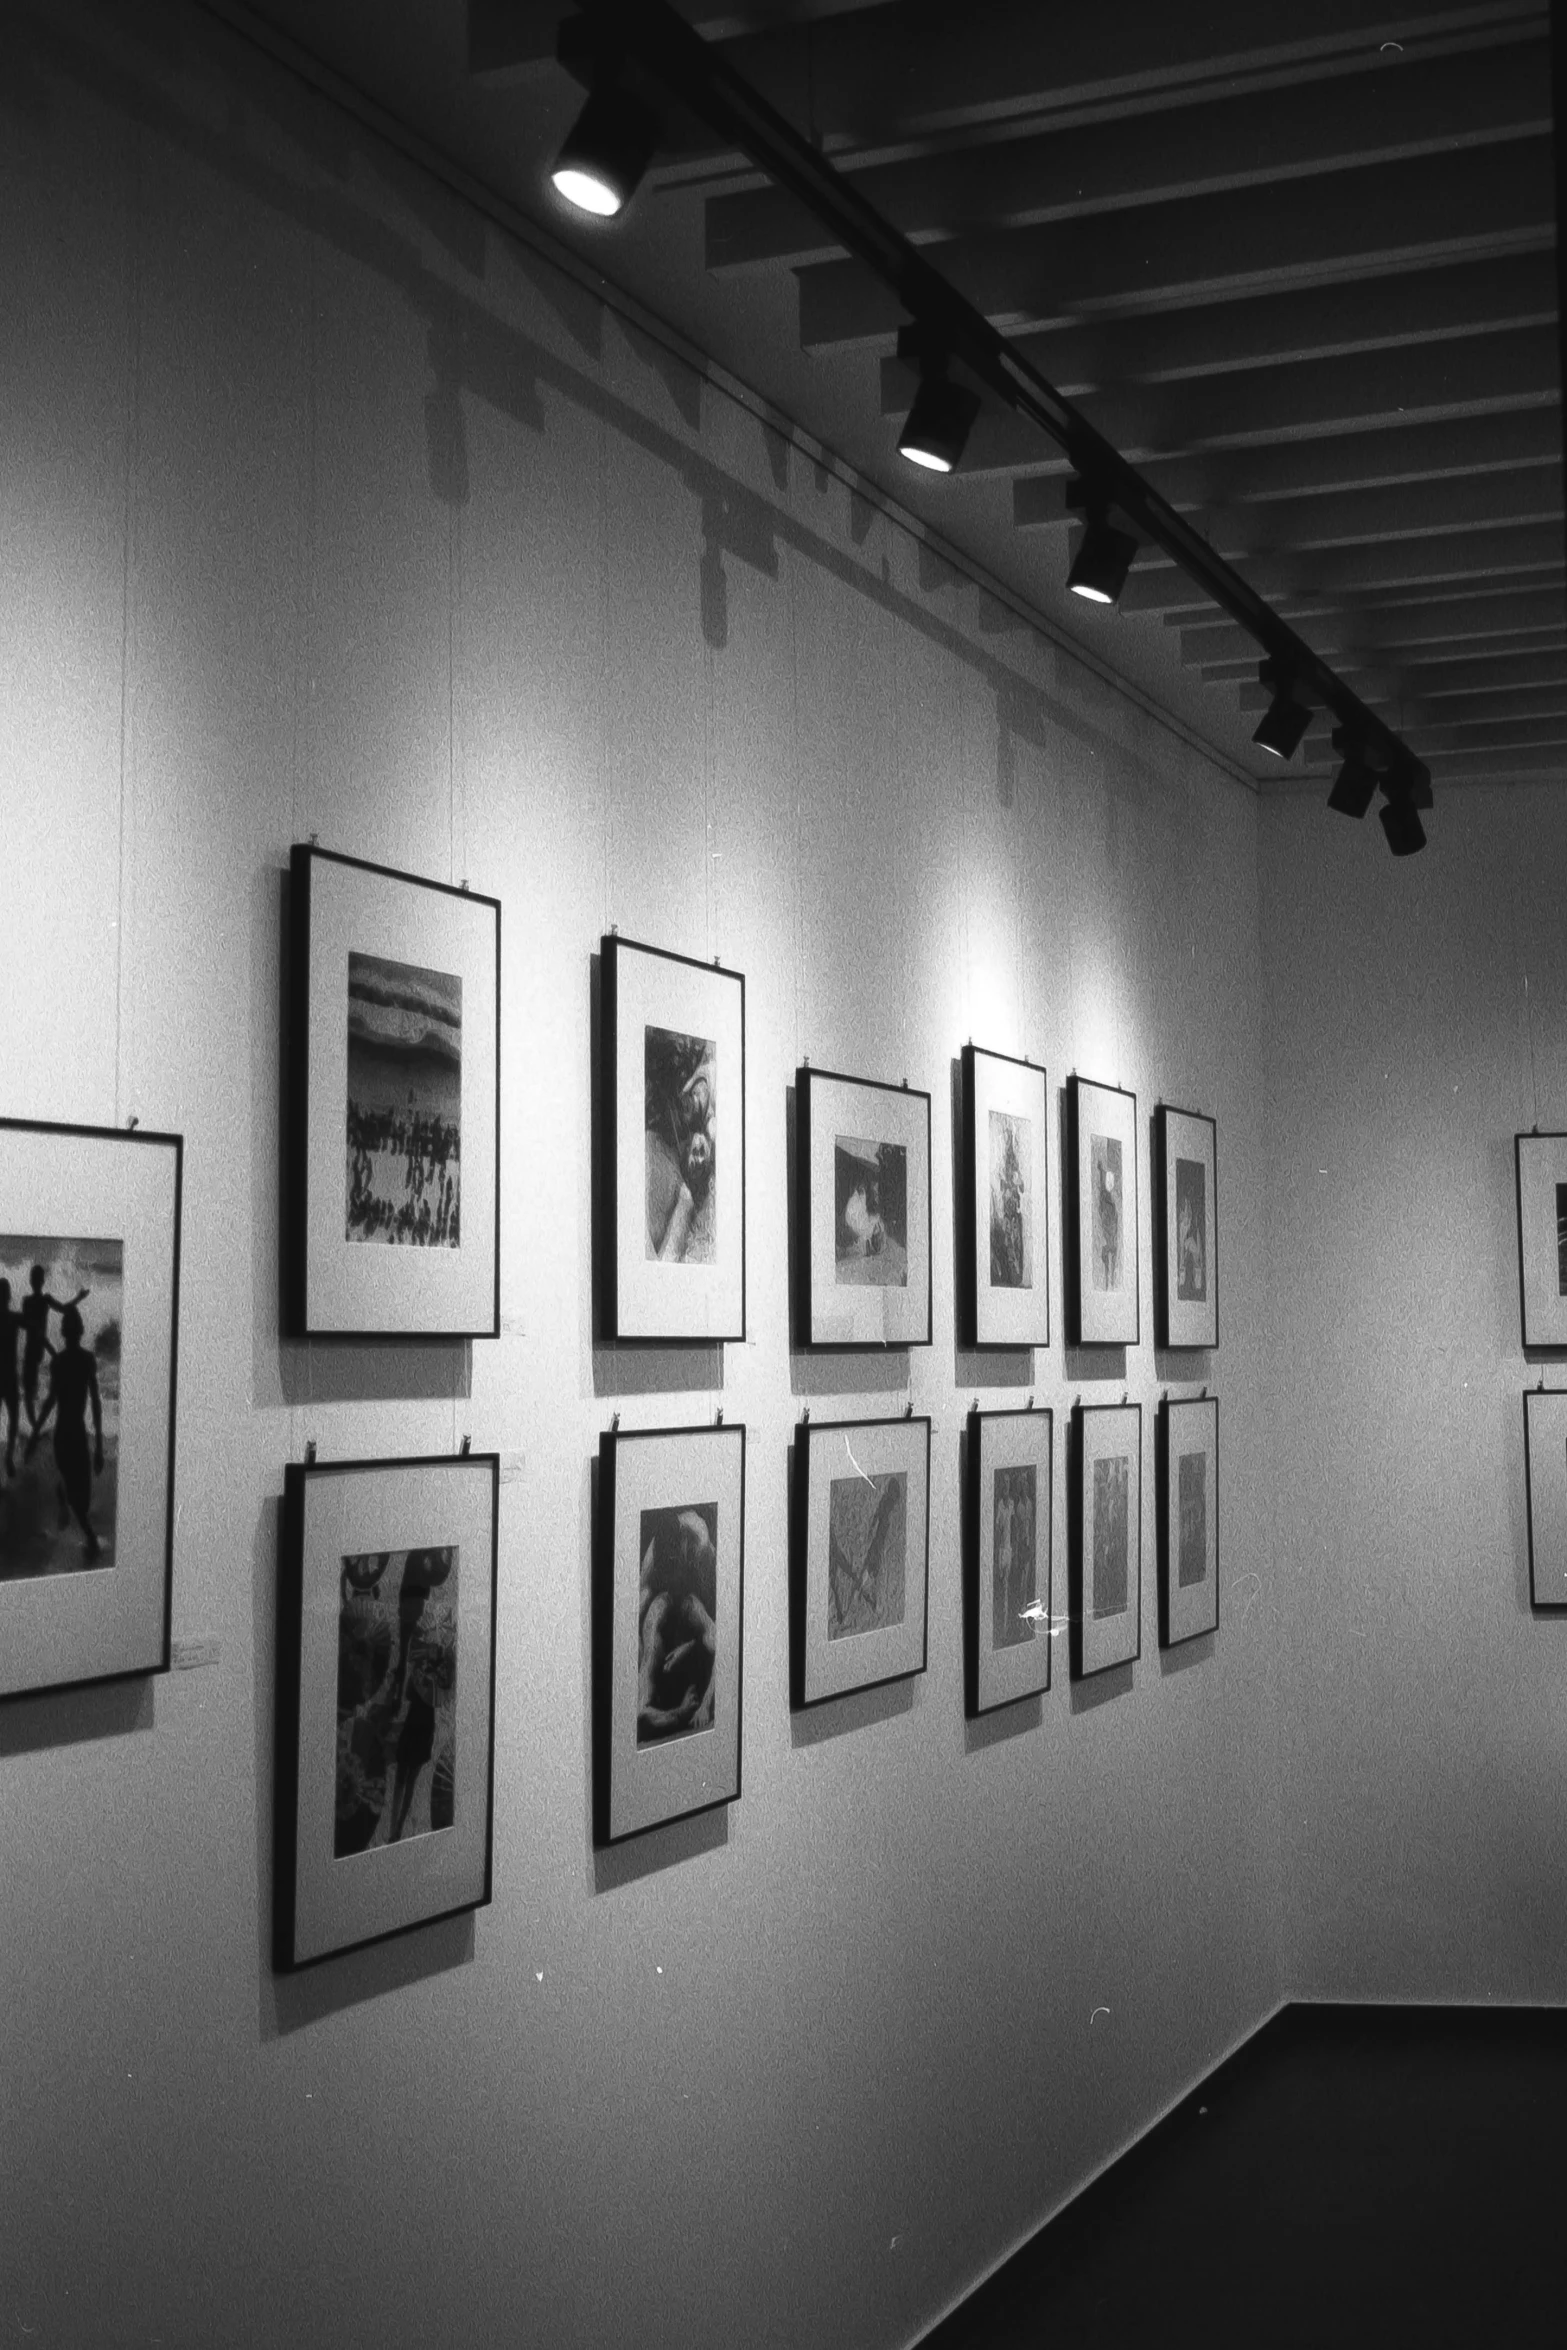 black and white po of many framed pographs on the wall